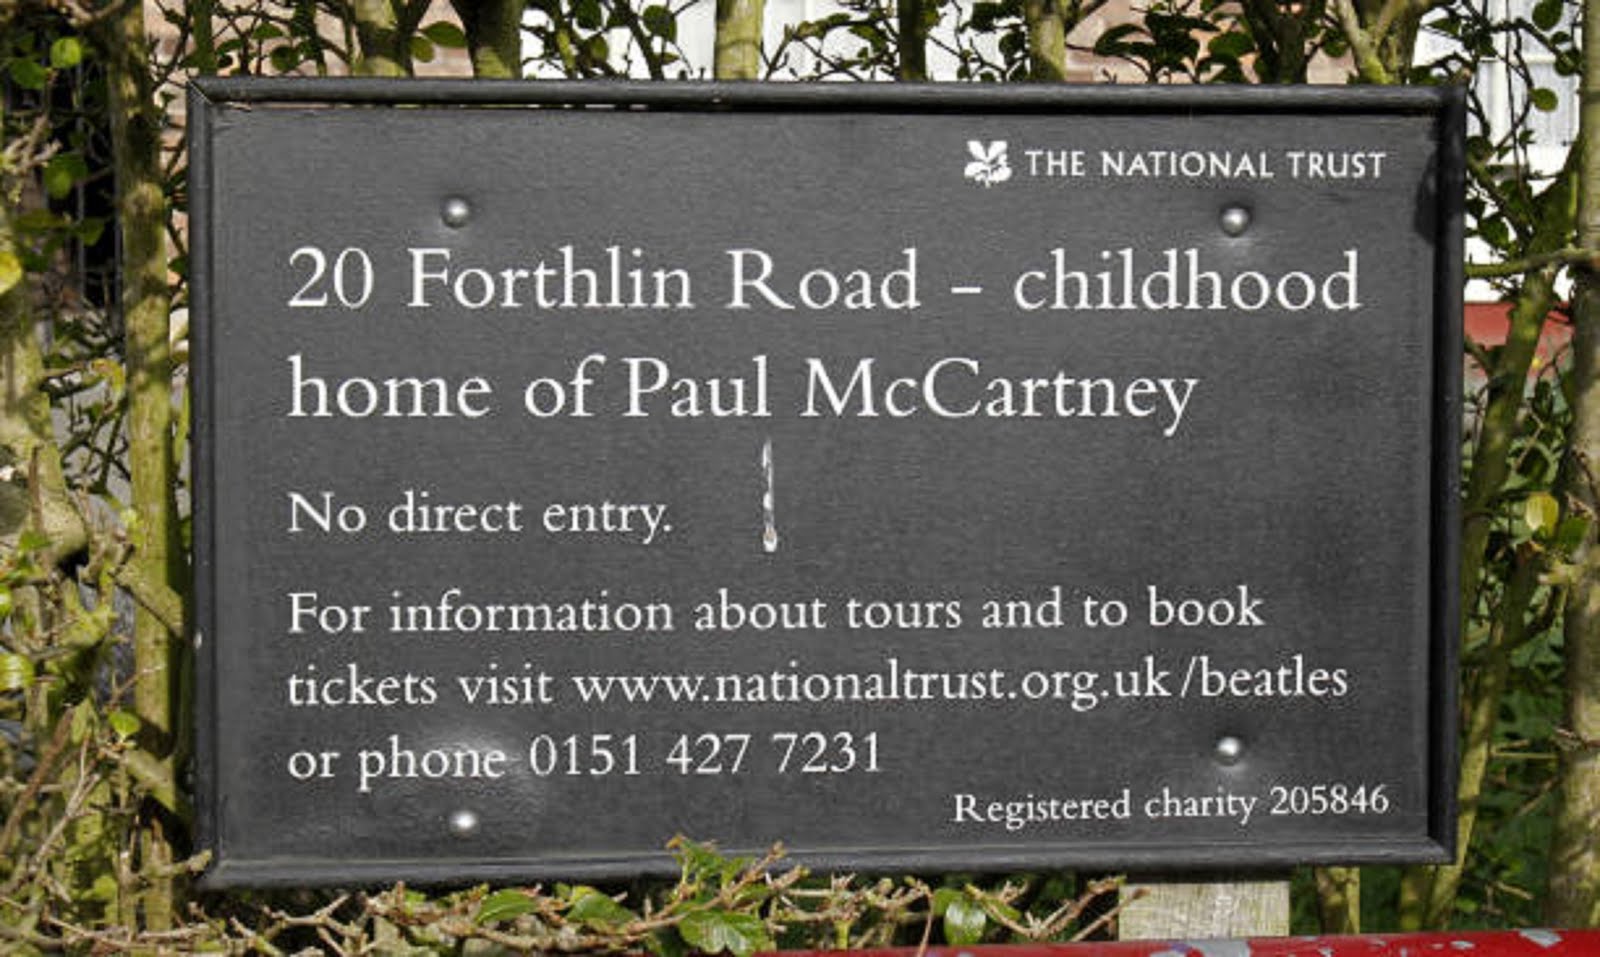 PAUL McCARTNEY'S HOUSE ON VIEW BY THE BEATLES.COM